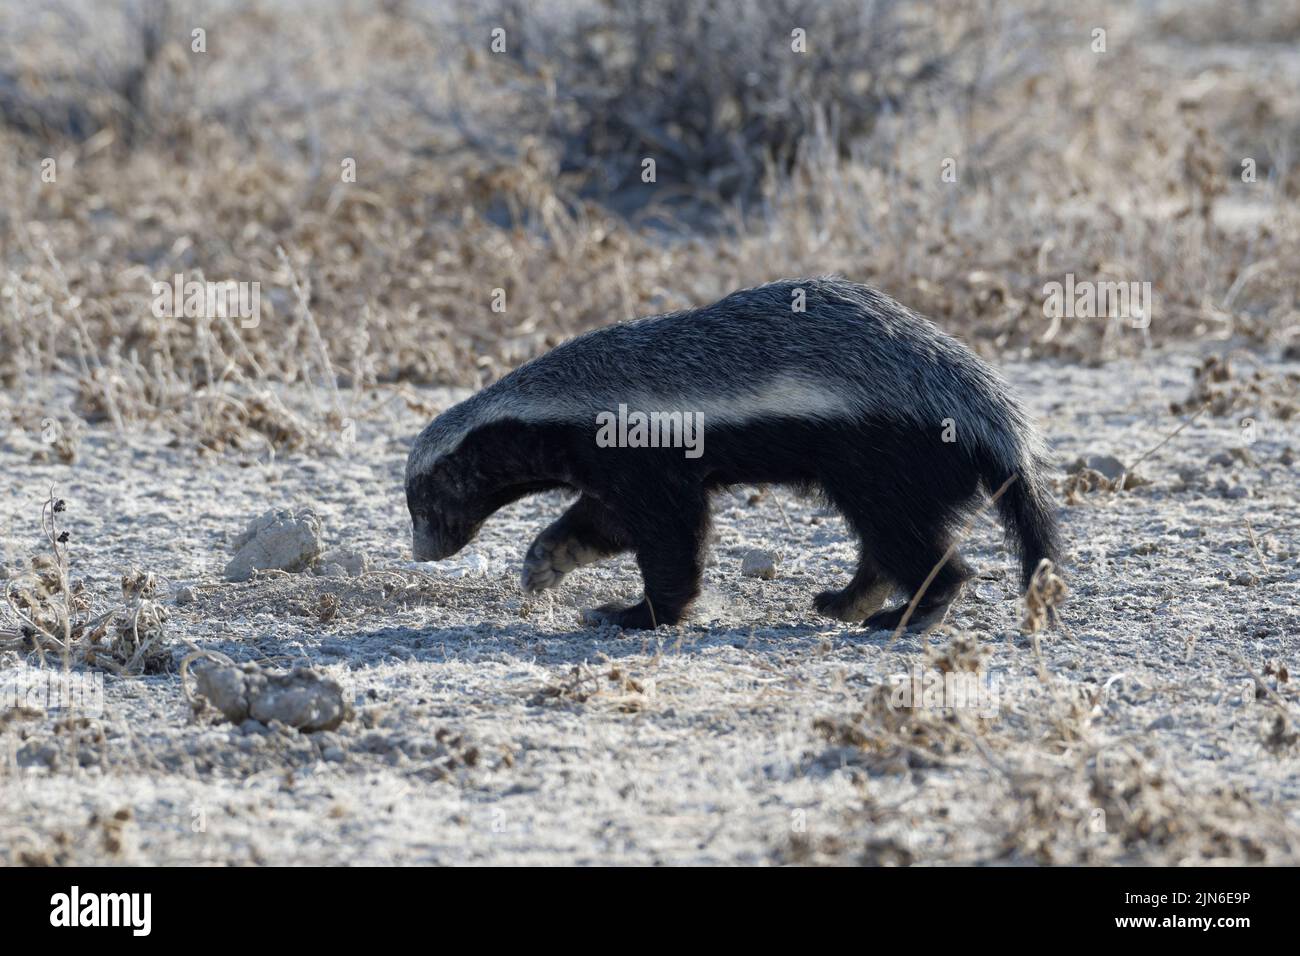 Honey badger (Mellivora capensis), walking adult male, in search of prey, Etosha National Park, Namibia, Africa Stock Photo